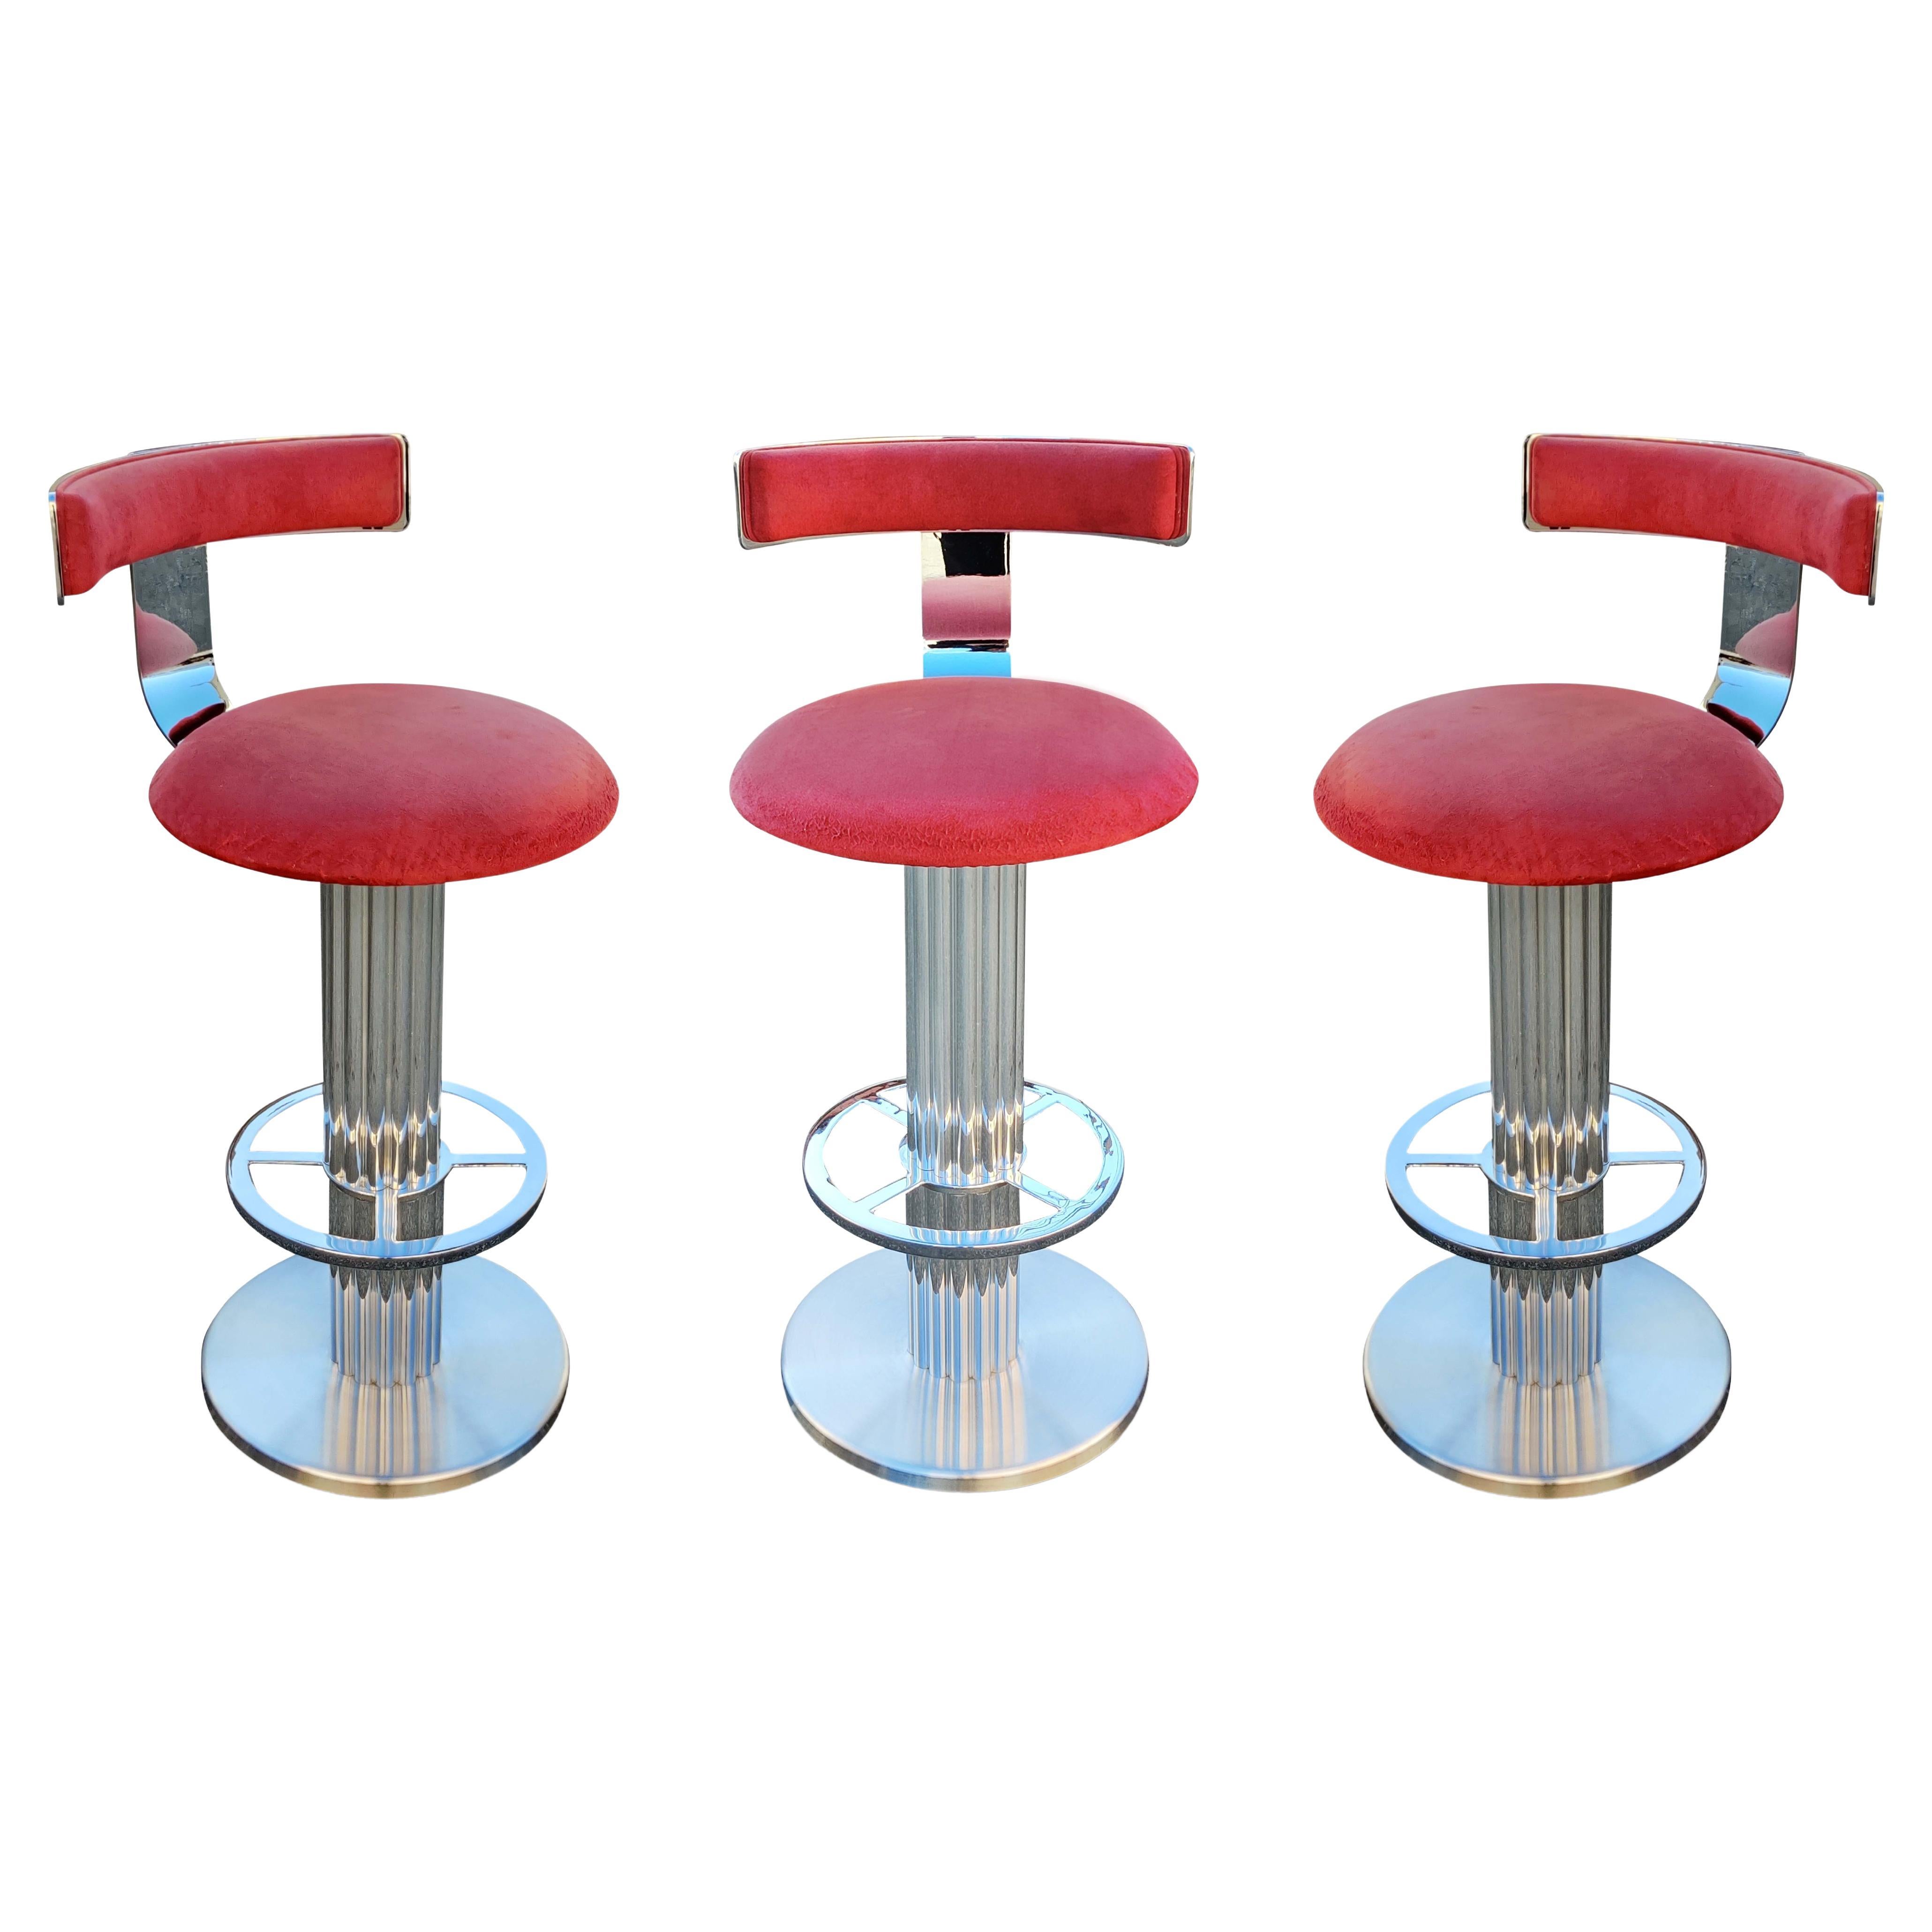 Designs for Leisure, 3 Brushed Stainless Steel Bar Stools 1980s, Set of Three